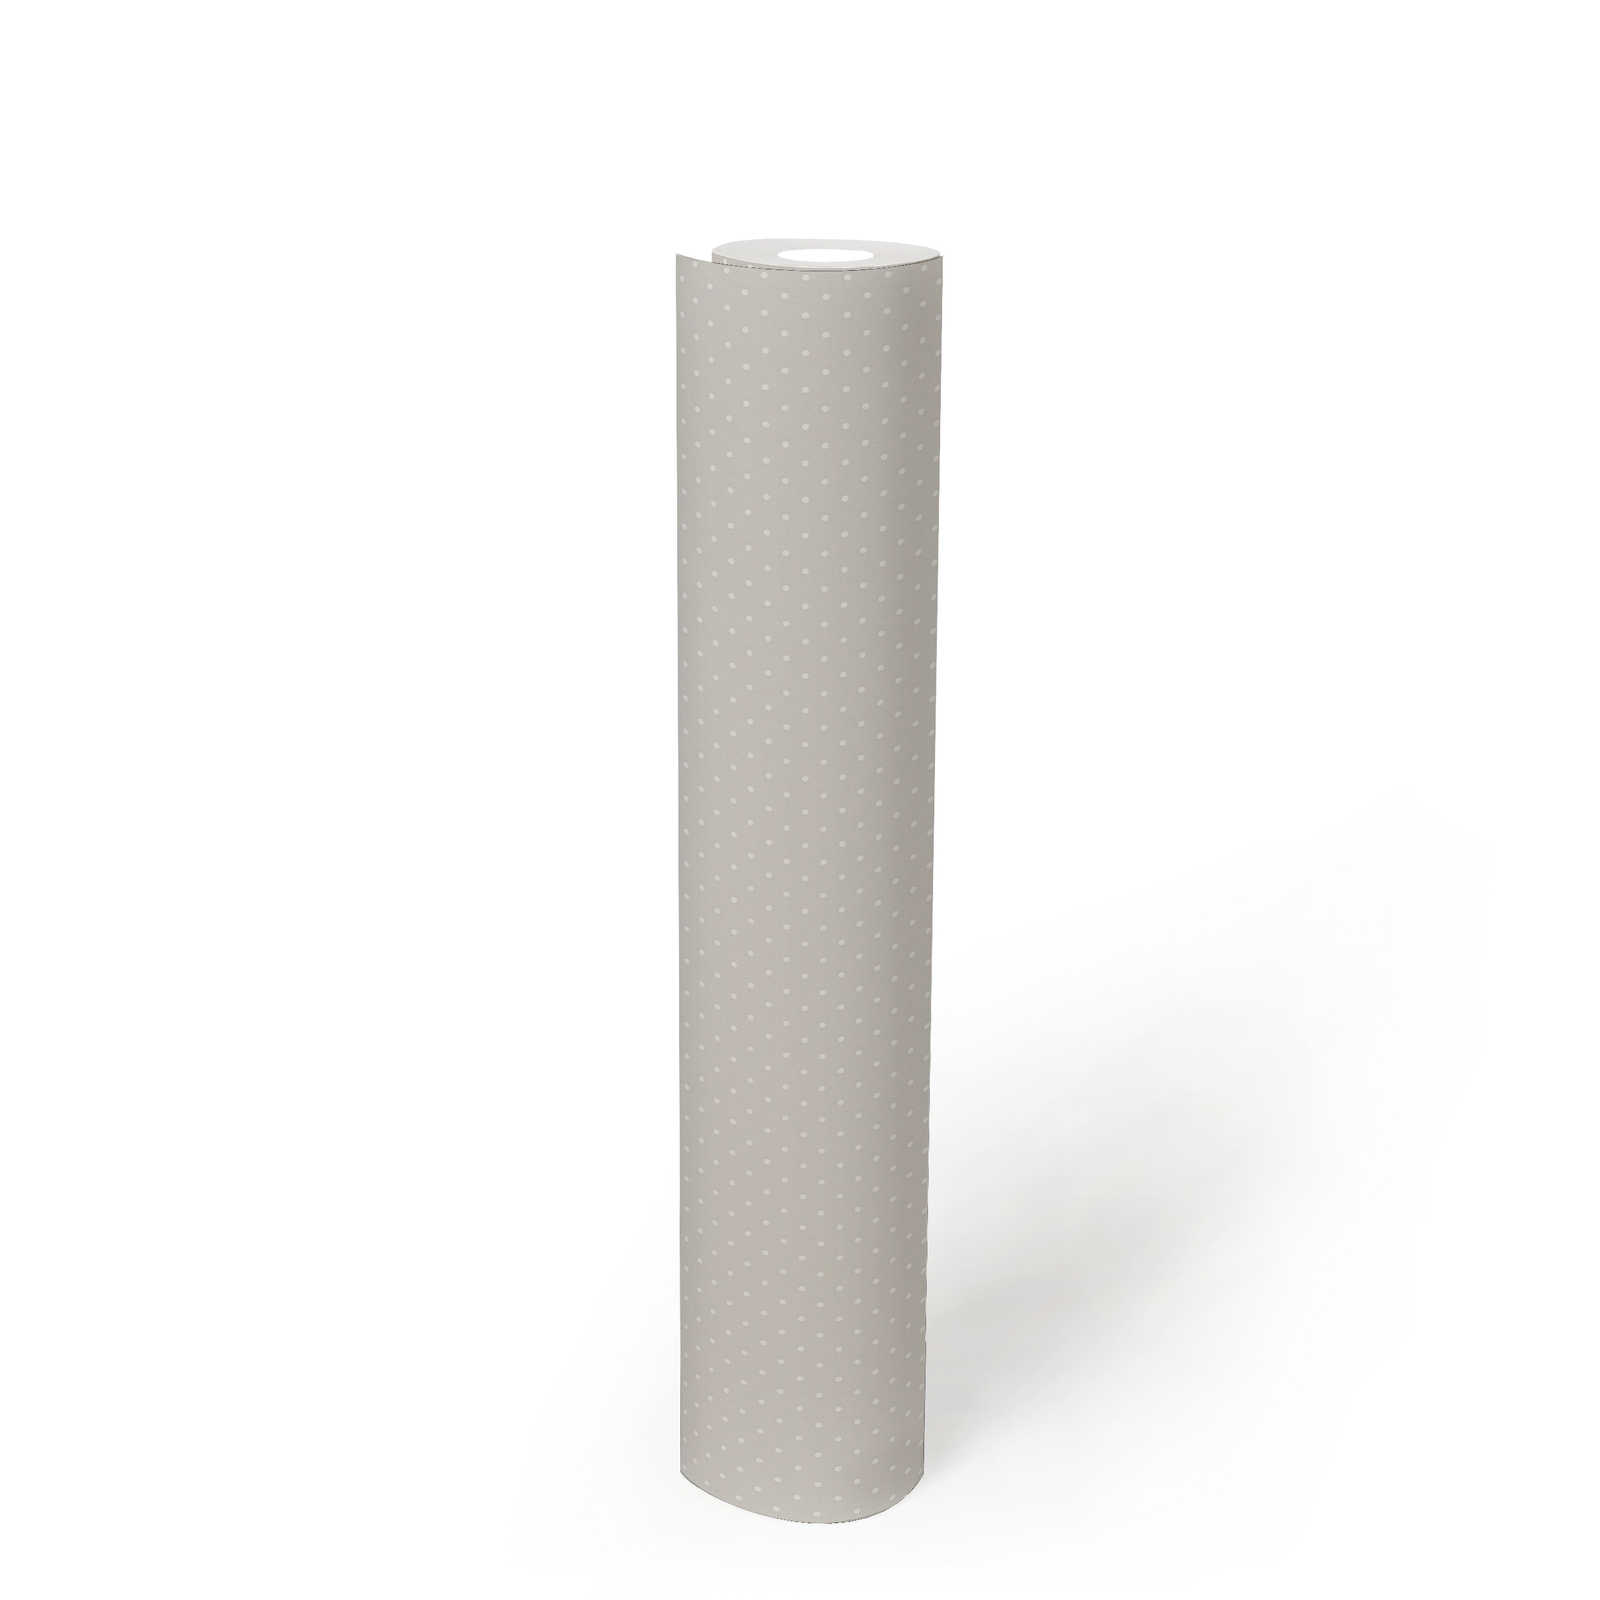             Non-woven wallpaper with small dot pattern - grey, white
        